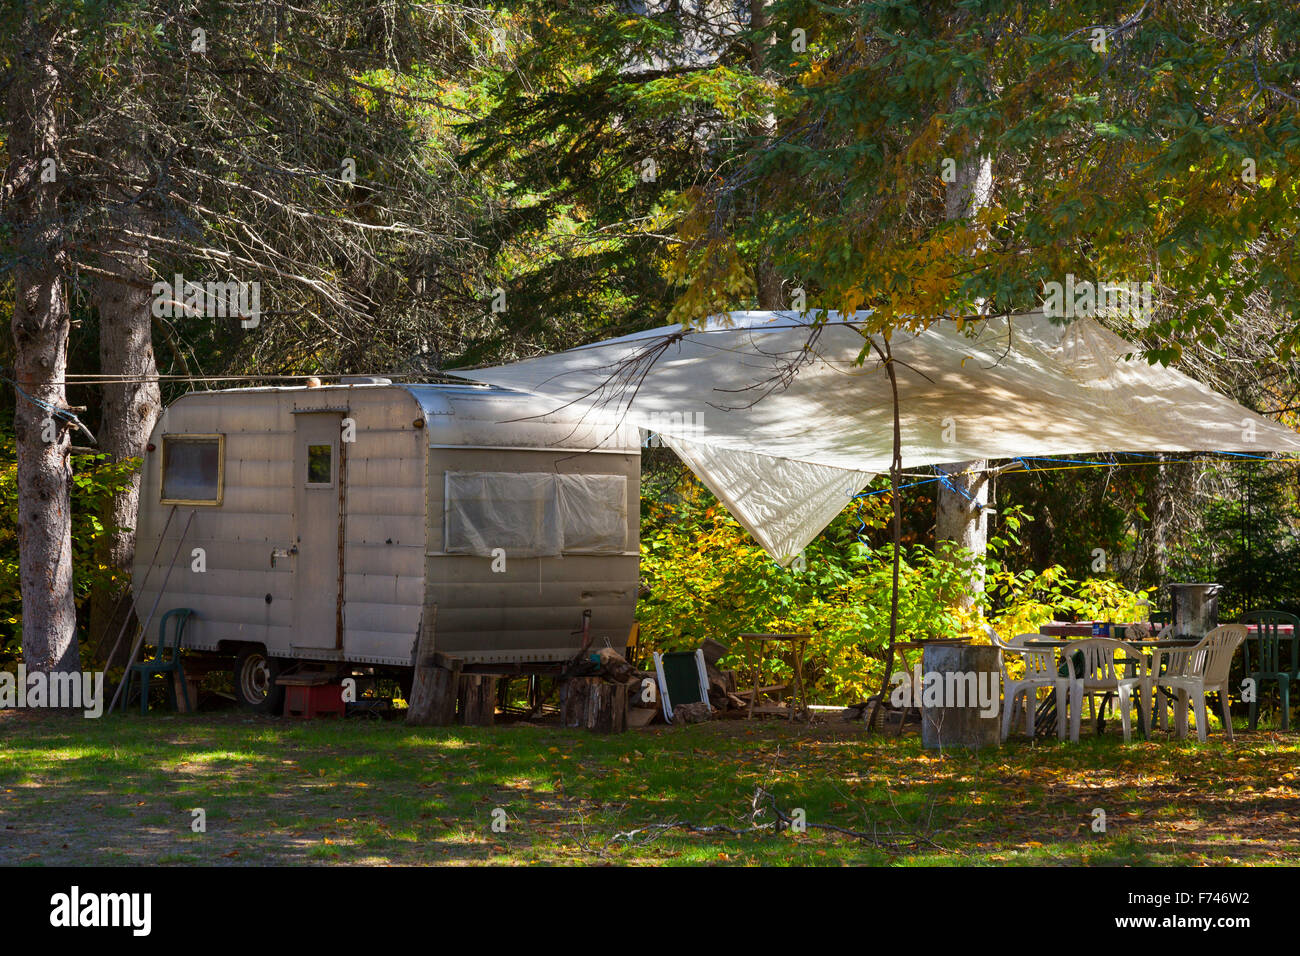 A vintage Camper Trailer set up at a campsite in Algonquin Provincial Park. Ontario, Canada. Stock Photo